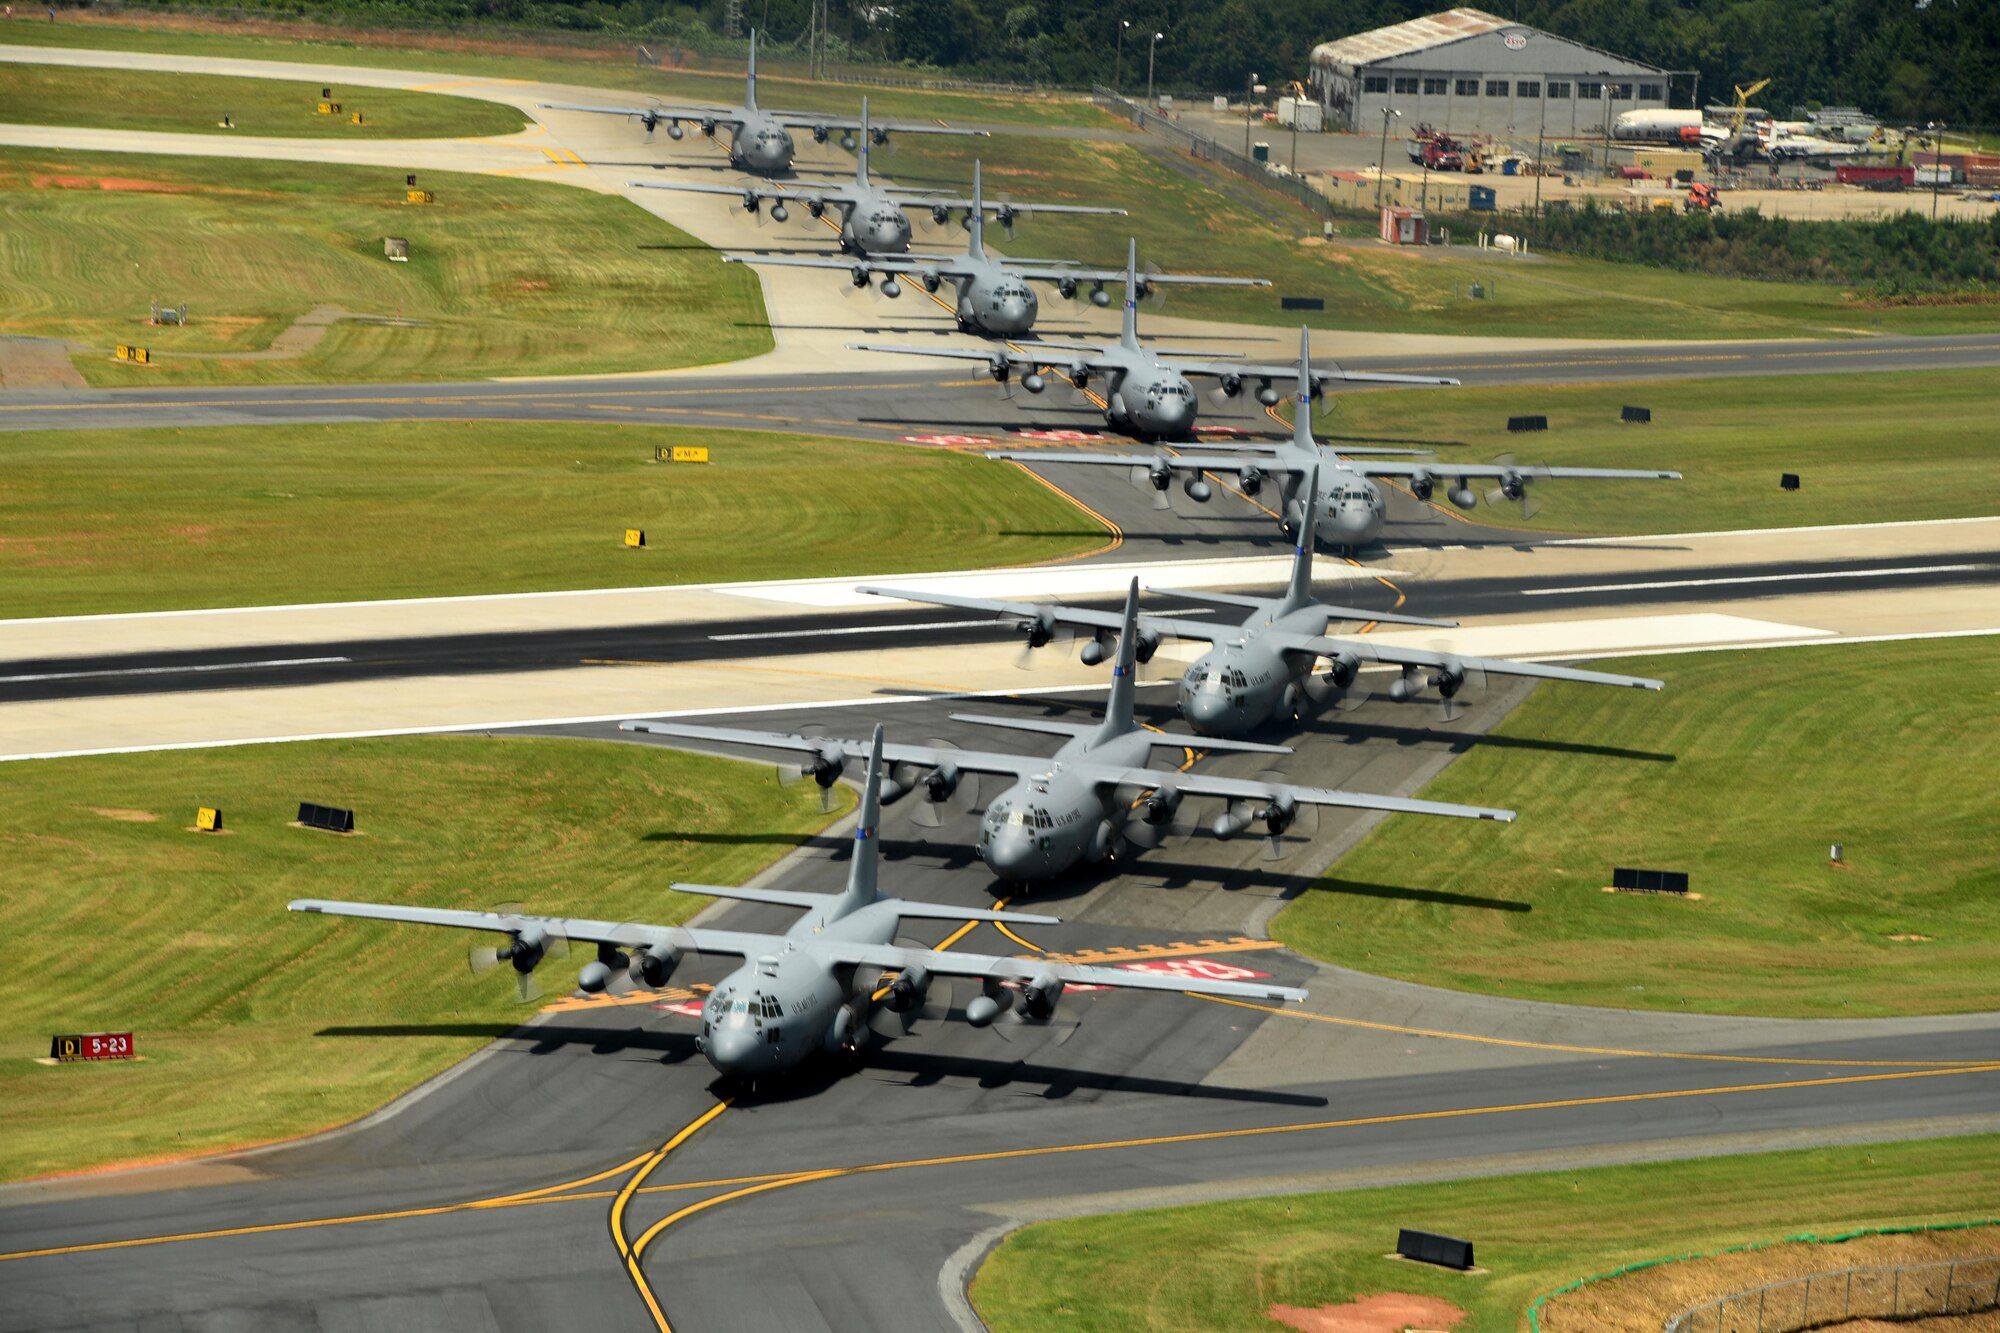 Eight C-130 aircraft taxi down the runway